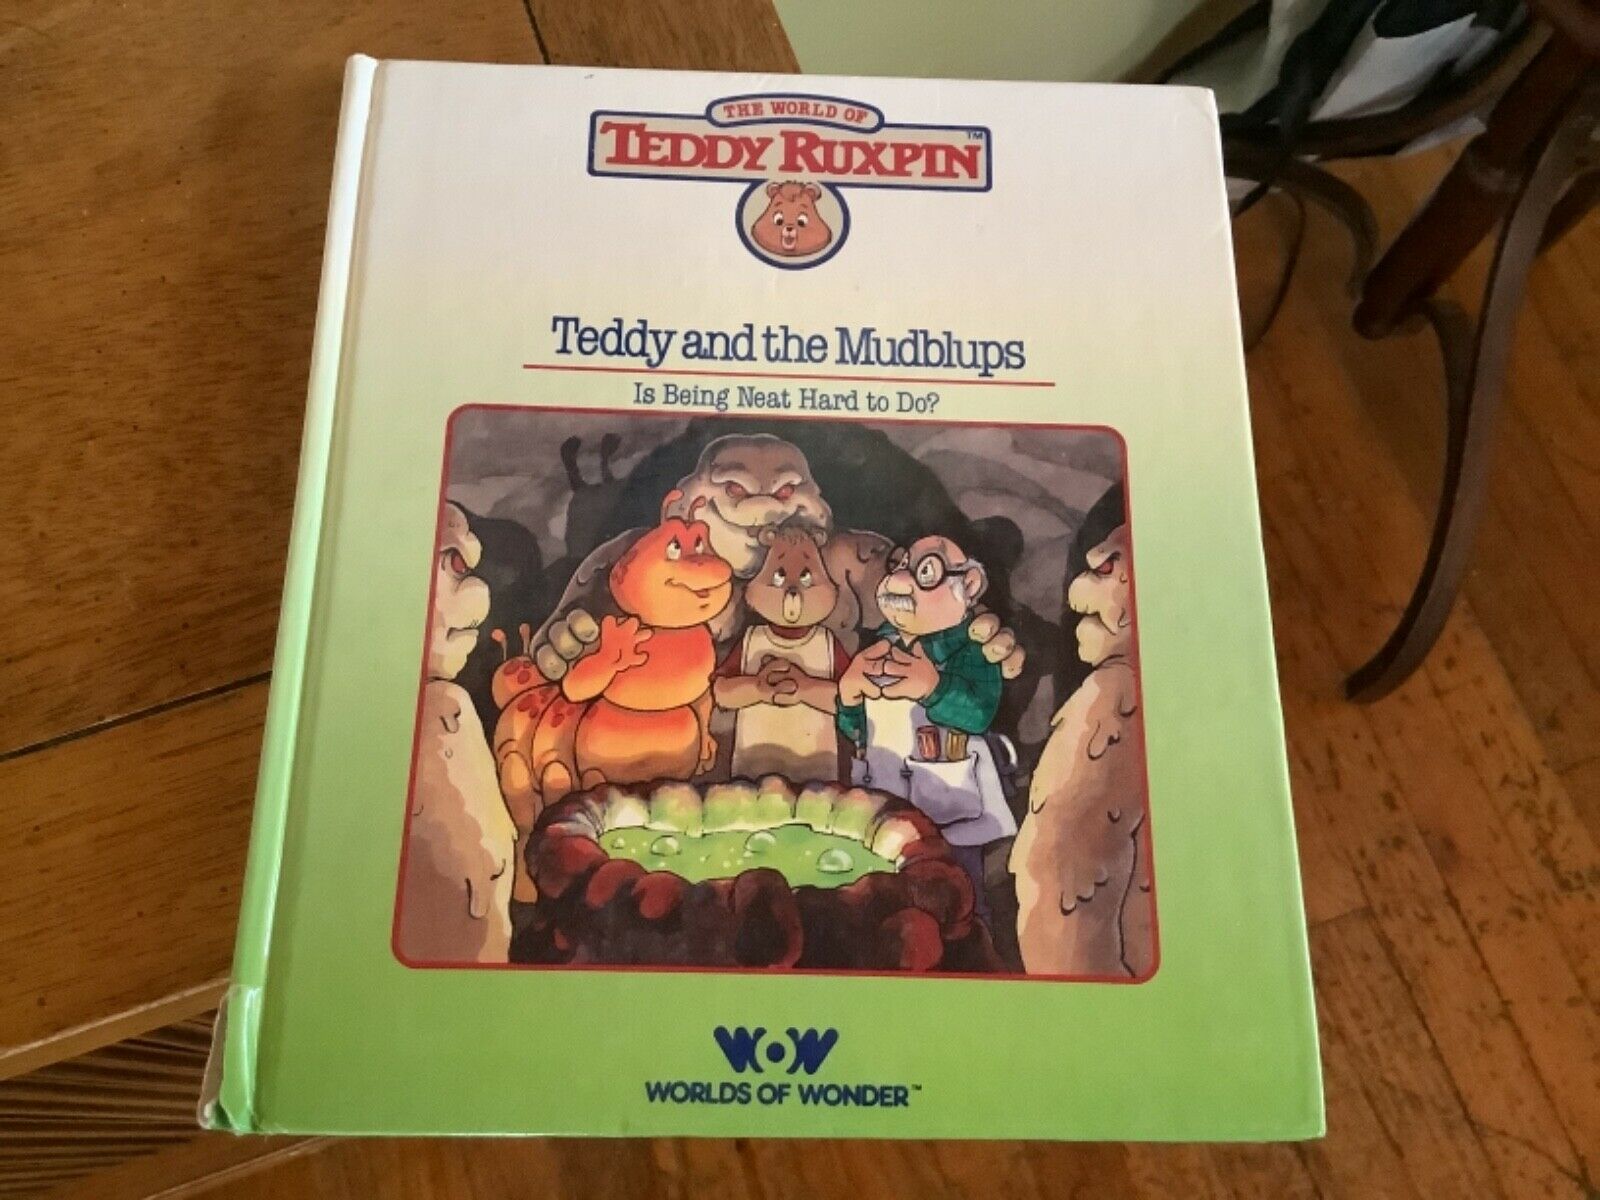 Vintage Teddy Ruxpin Teddy and the Mudblups Book 1985 Worlds of Wonder